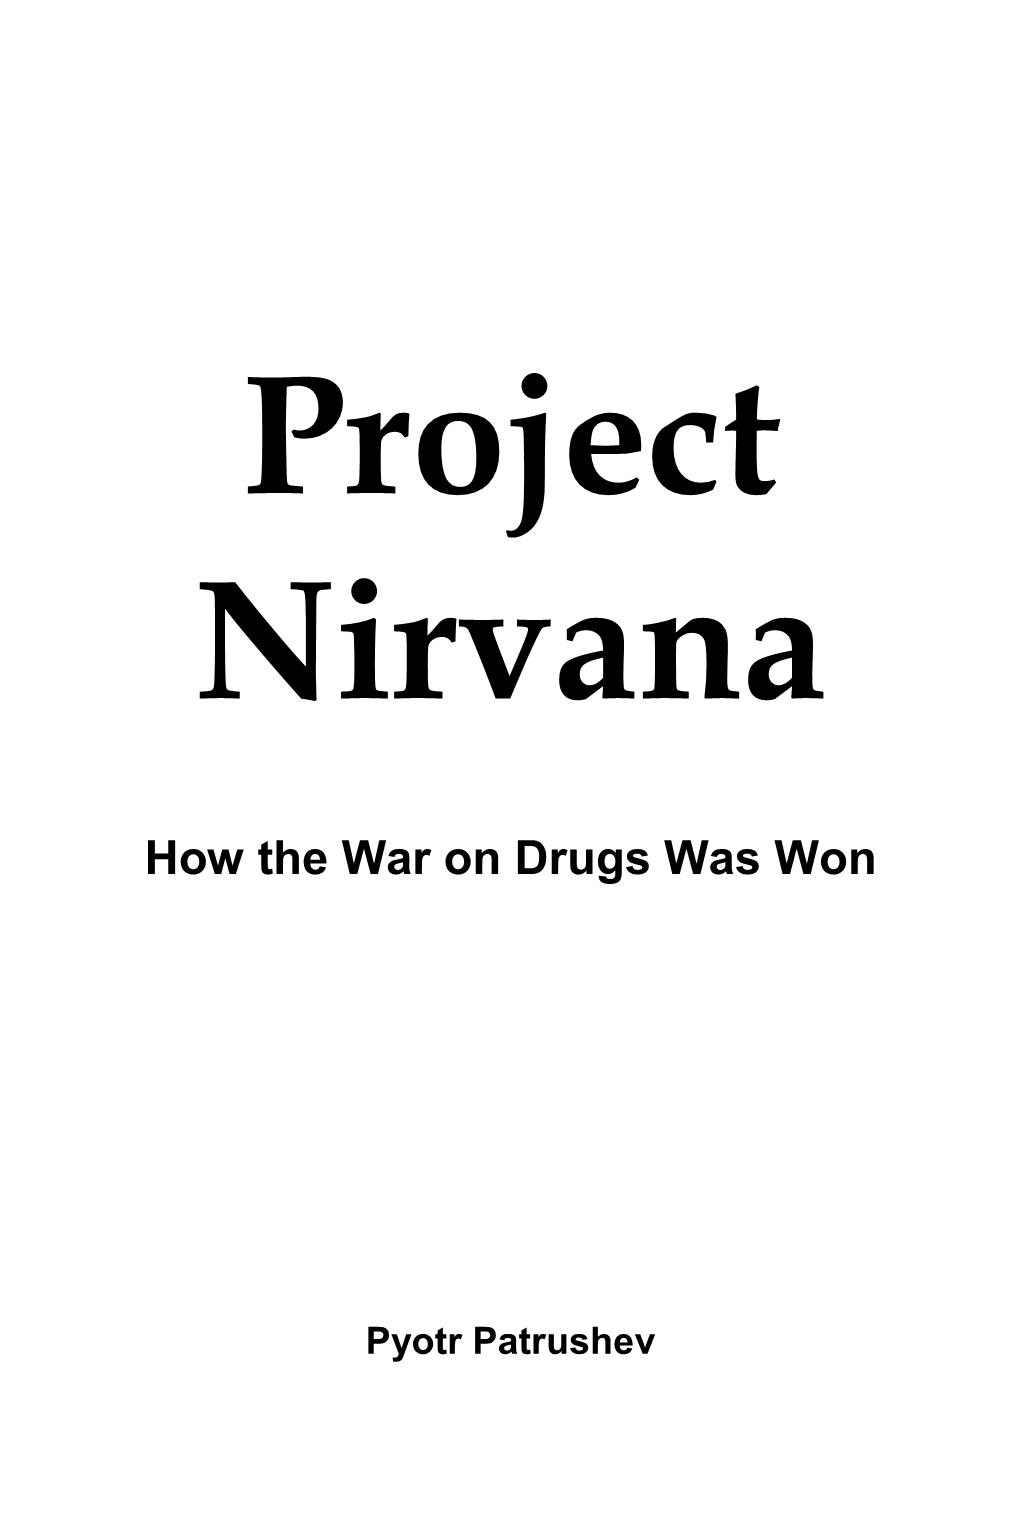 Project Nirvana: How the War on Drugs Was Won, Leaf Garden Press, 2014